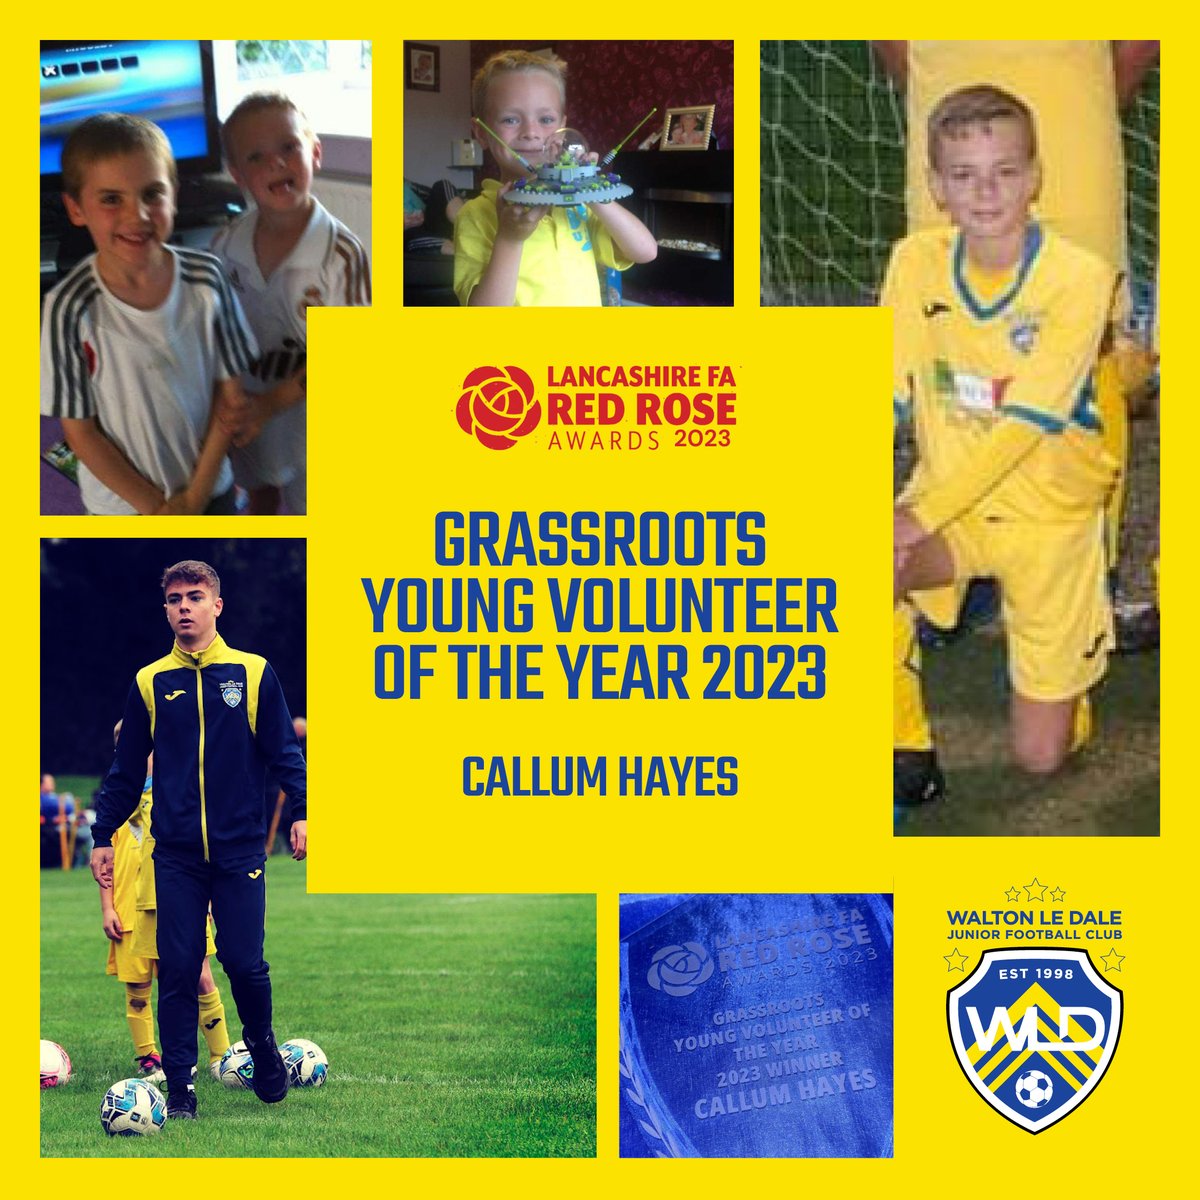 From WLD youth player, to U8 manager, committee member & youth committee lead... Tonight he was crowned 'Grassroots Young Volunteer of the Year 2023' at the @LancashireFA Red Rose Awards. Congratulations Callum, we're so proud and appreciate everything you do for our club. 🏆💛